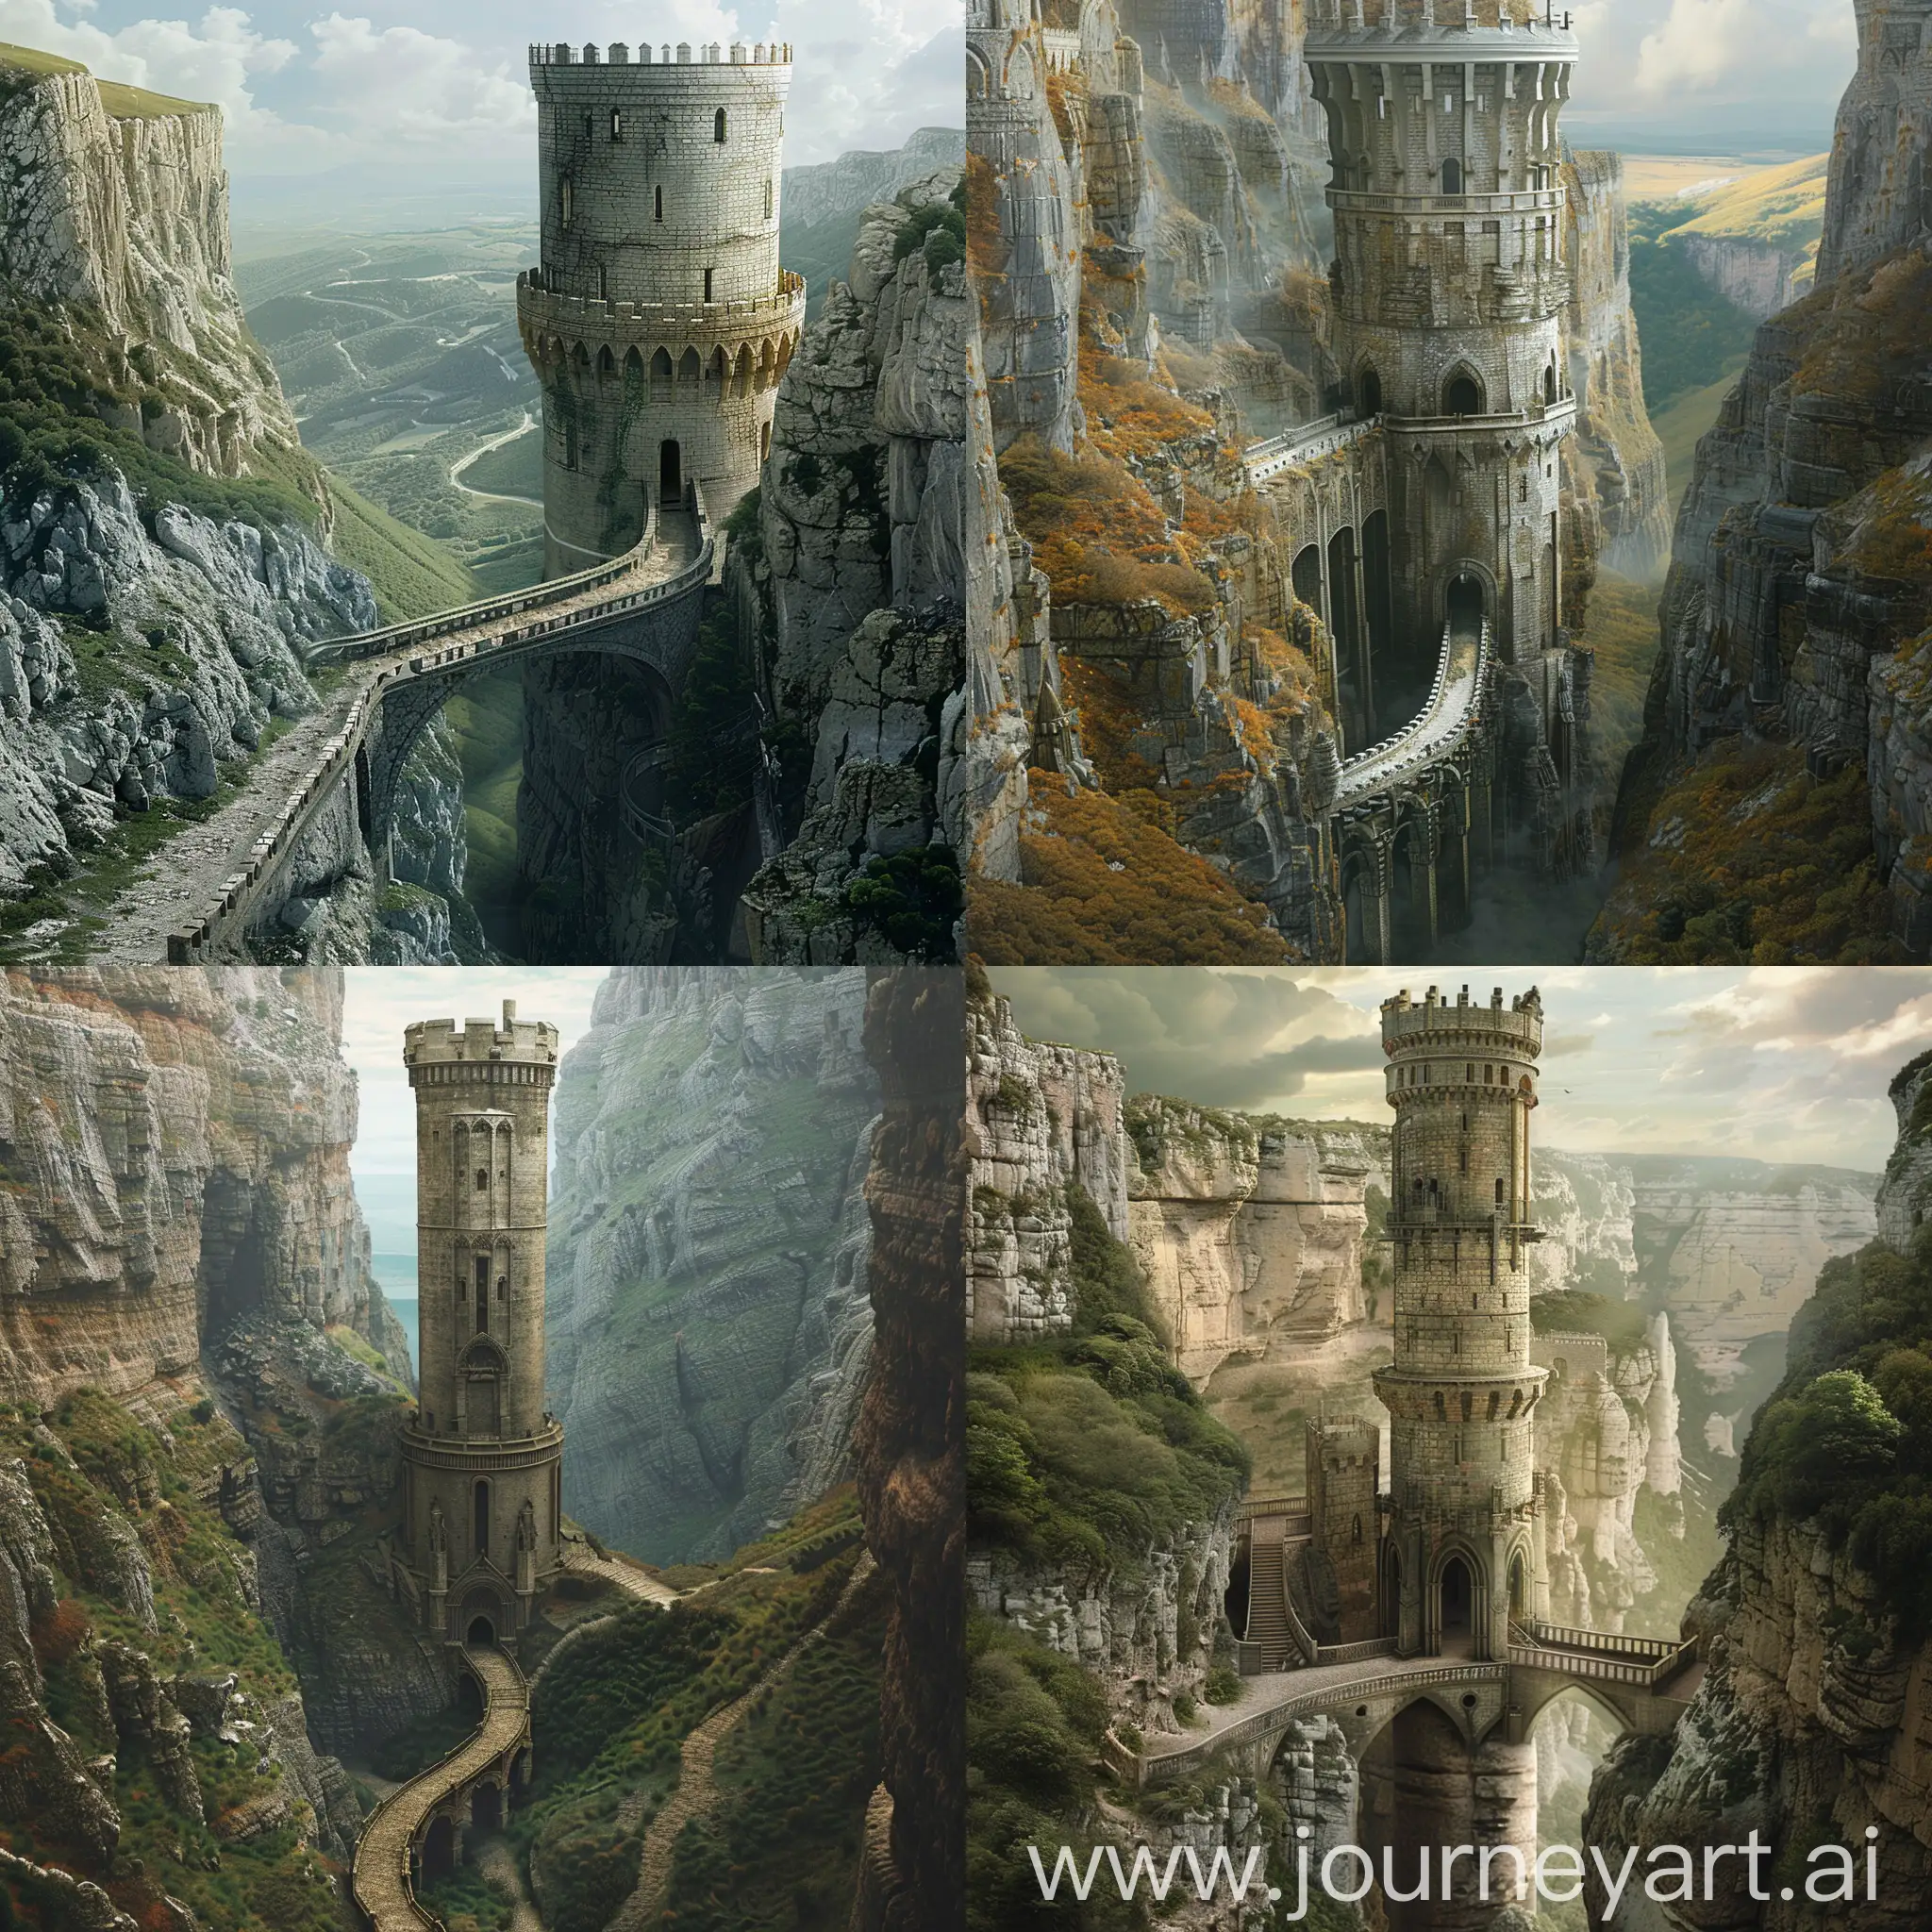 Majestic-Medieval-Tower-Overlooking-Endless-Valley-with-Bridge-Entrance